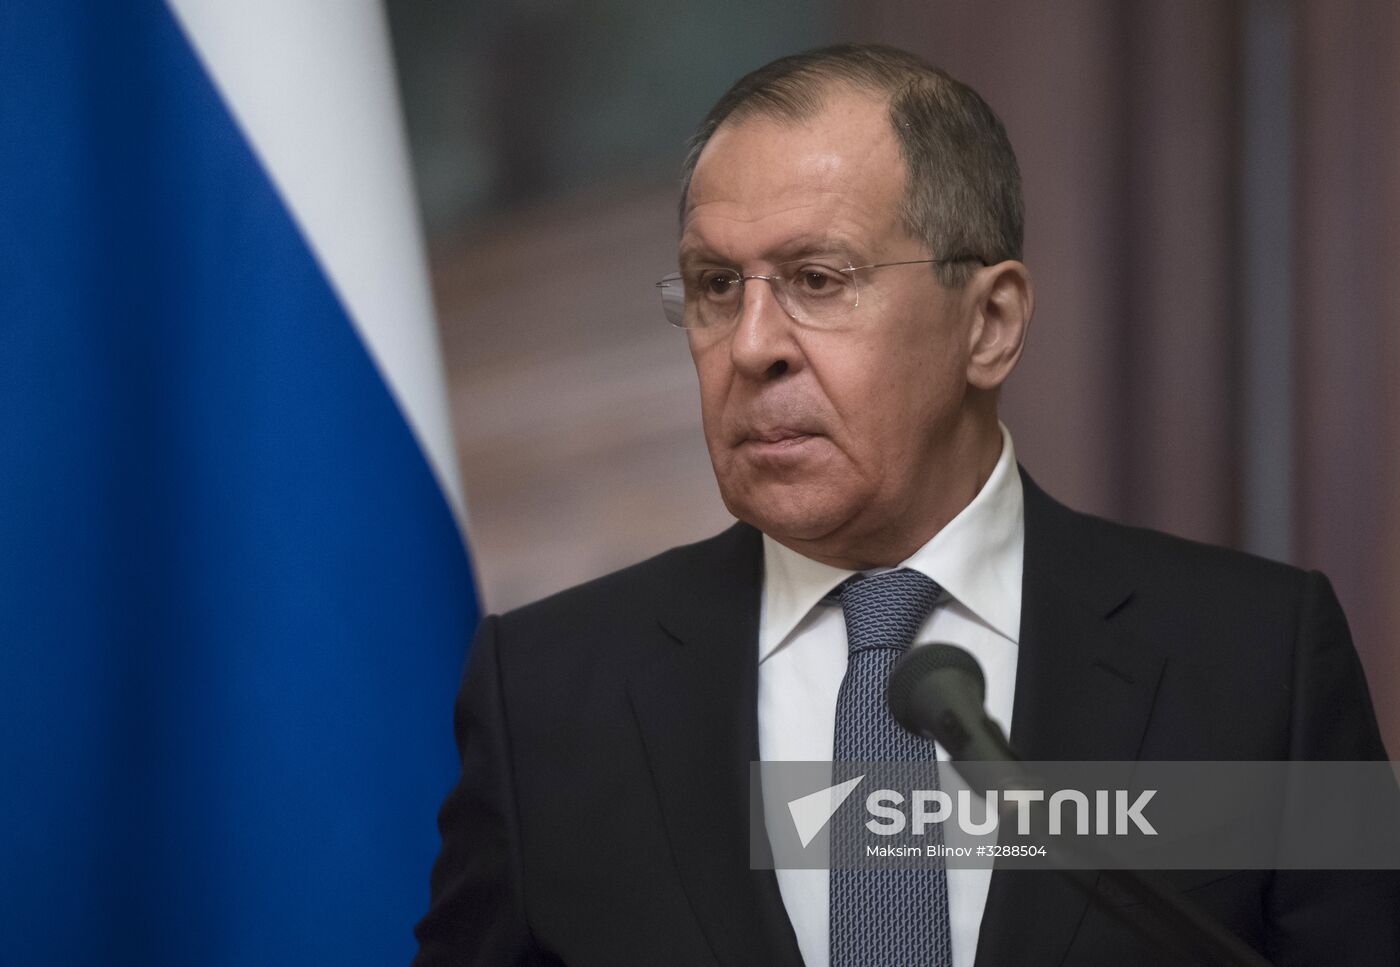 Russian Foreign Minister Sergei Lavrov meets with Foreign Minister of Denmark Anders Samuelsen